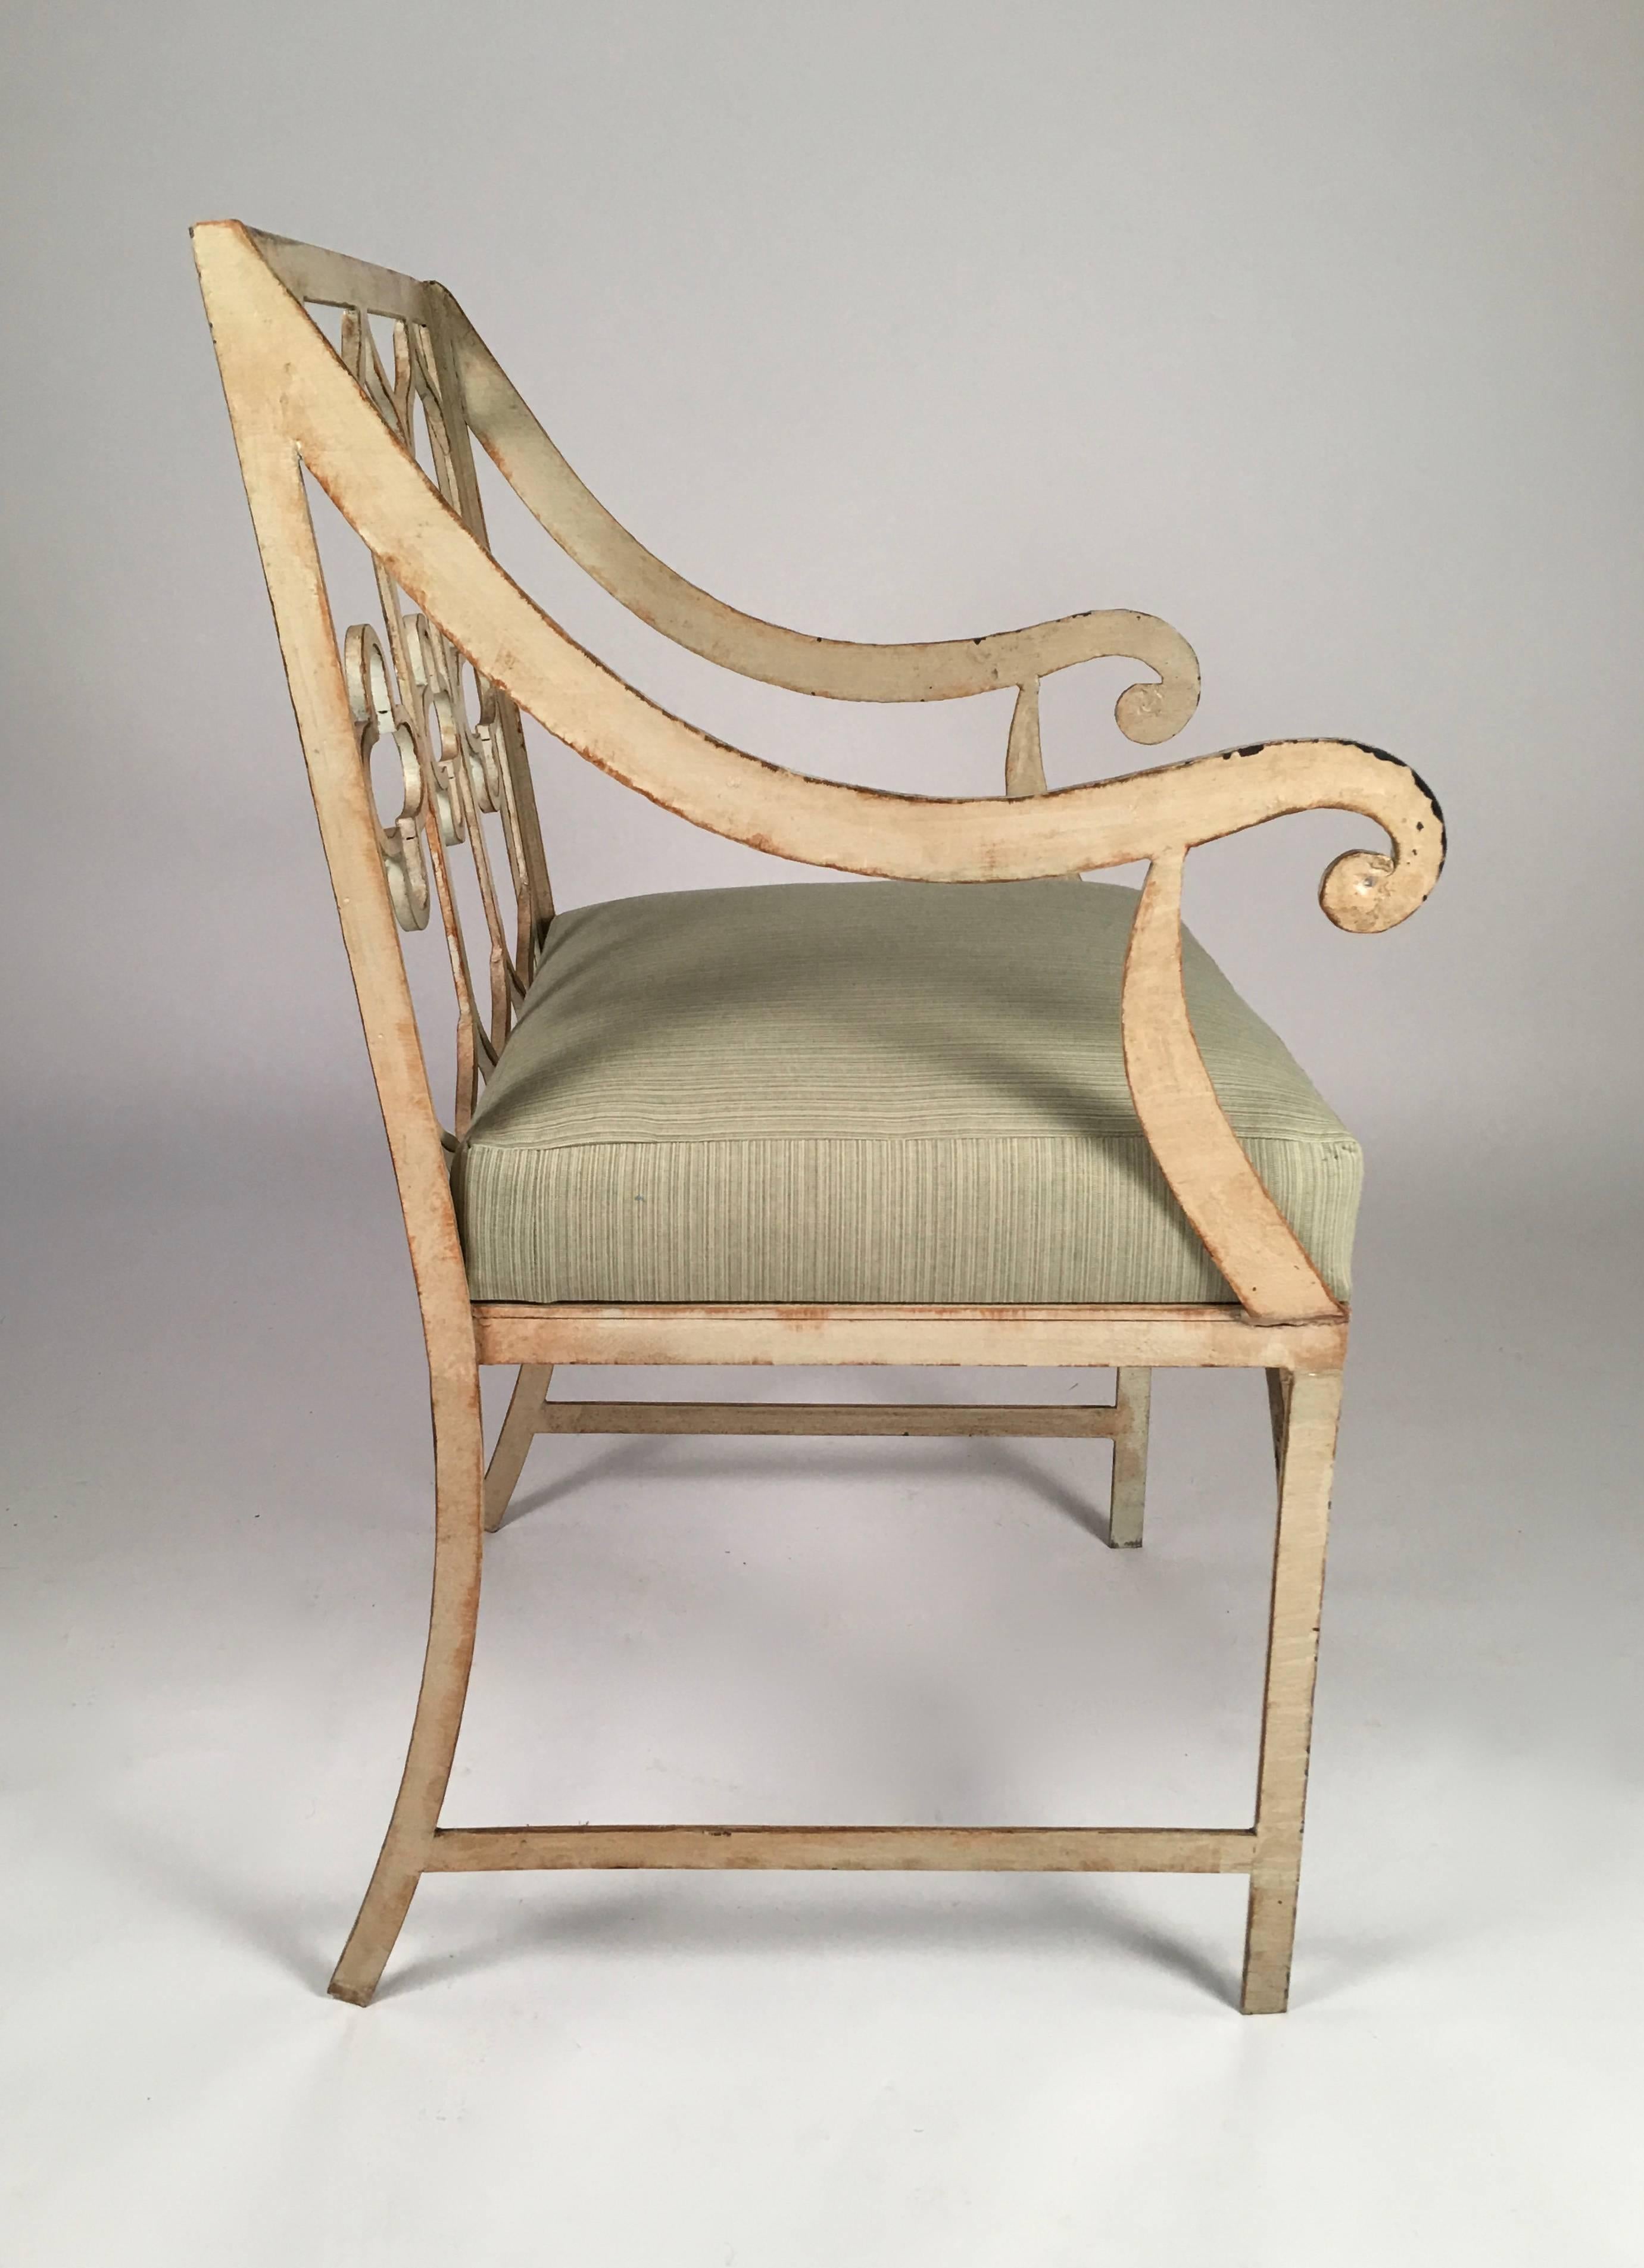 Hand-Crafted Gothic Revival Iron Garden Chair